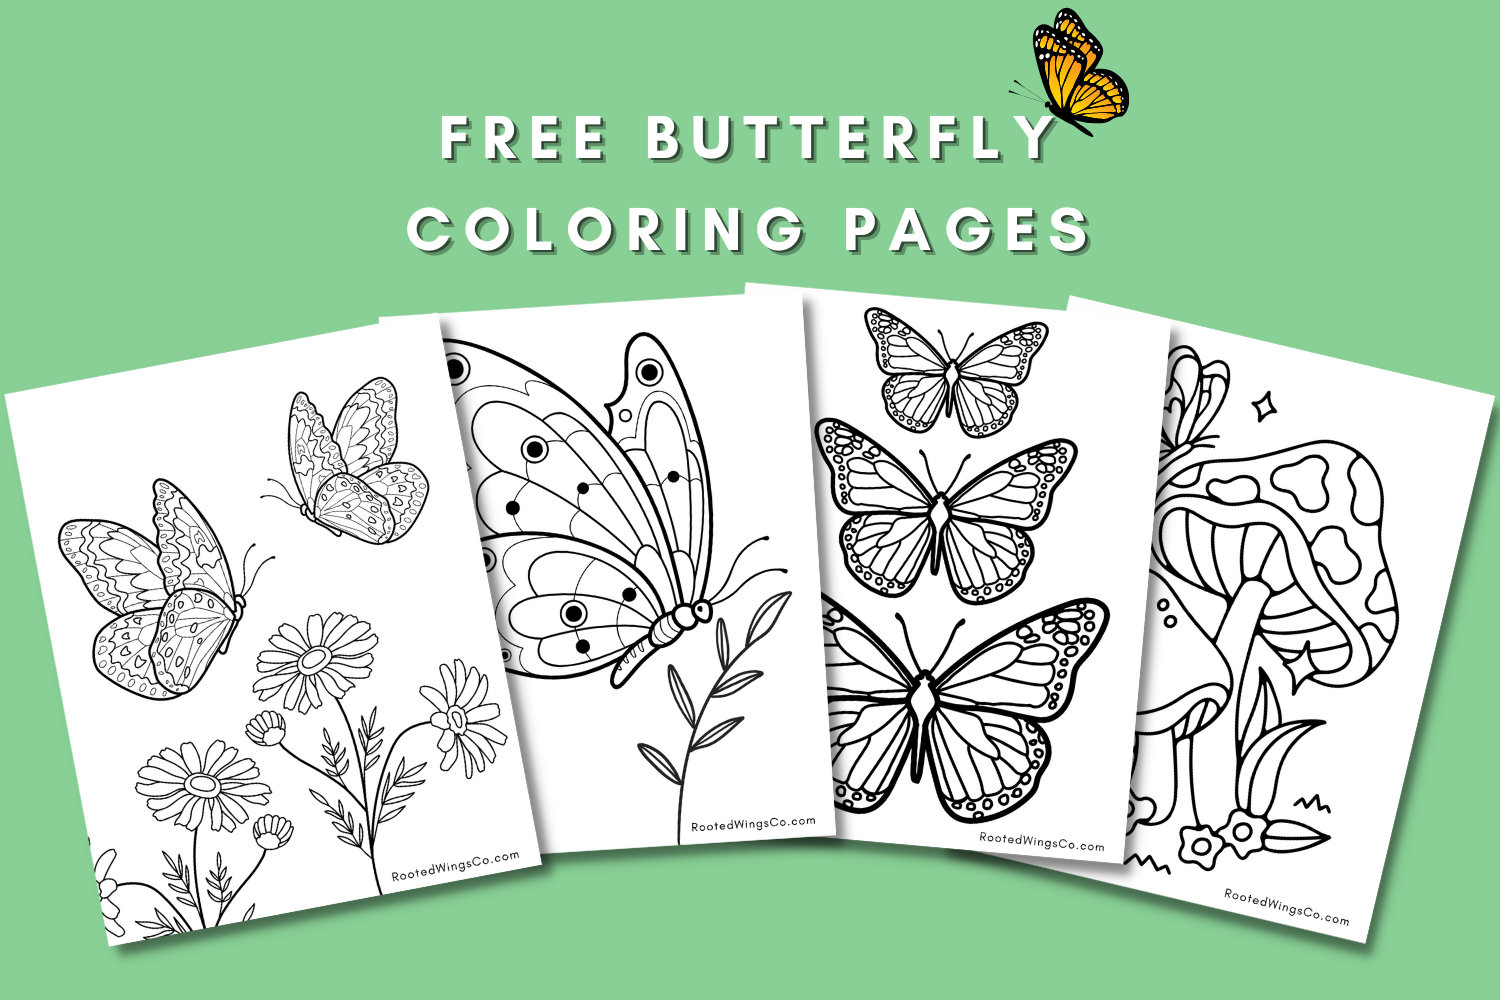 Free Butterfly Coloring Pages – For Kids or Adults